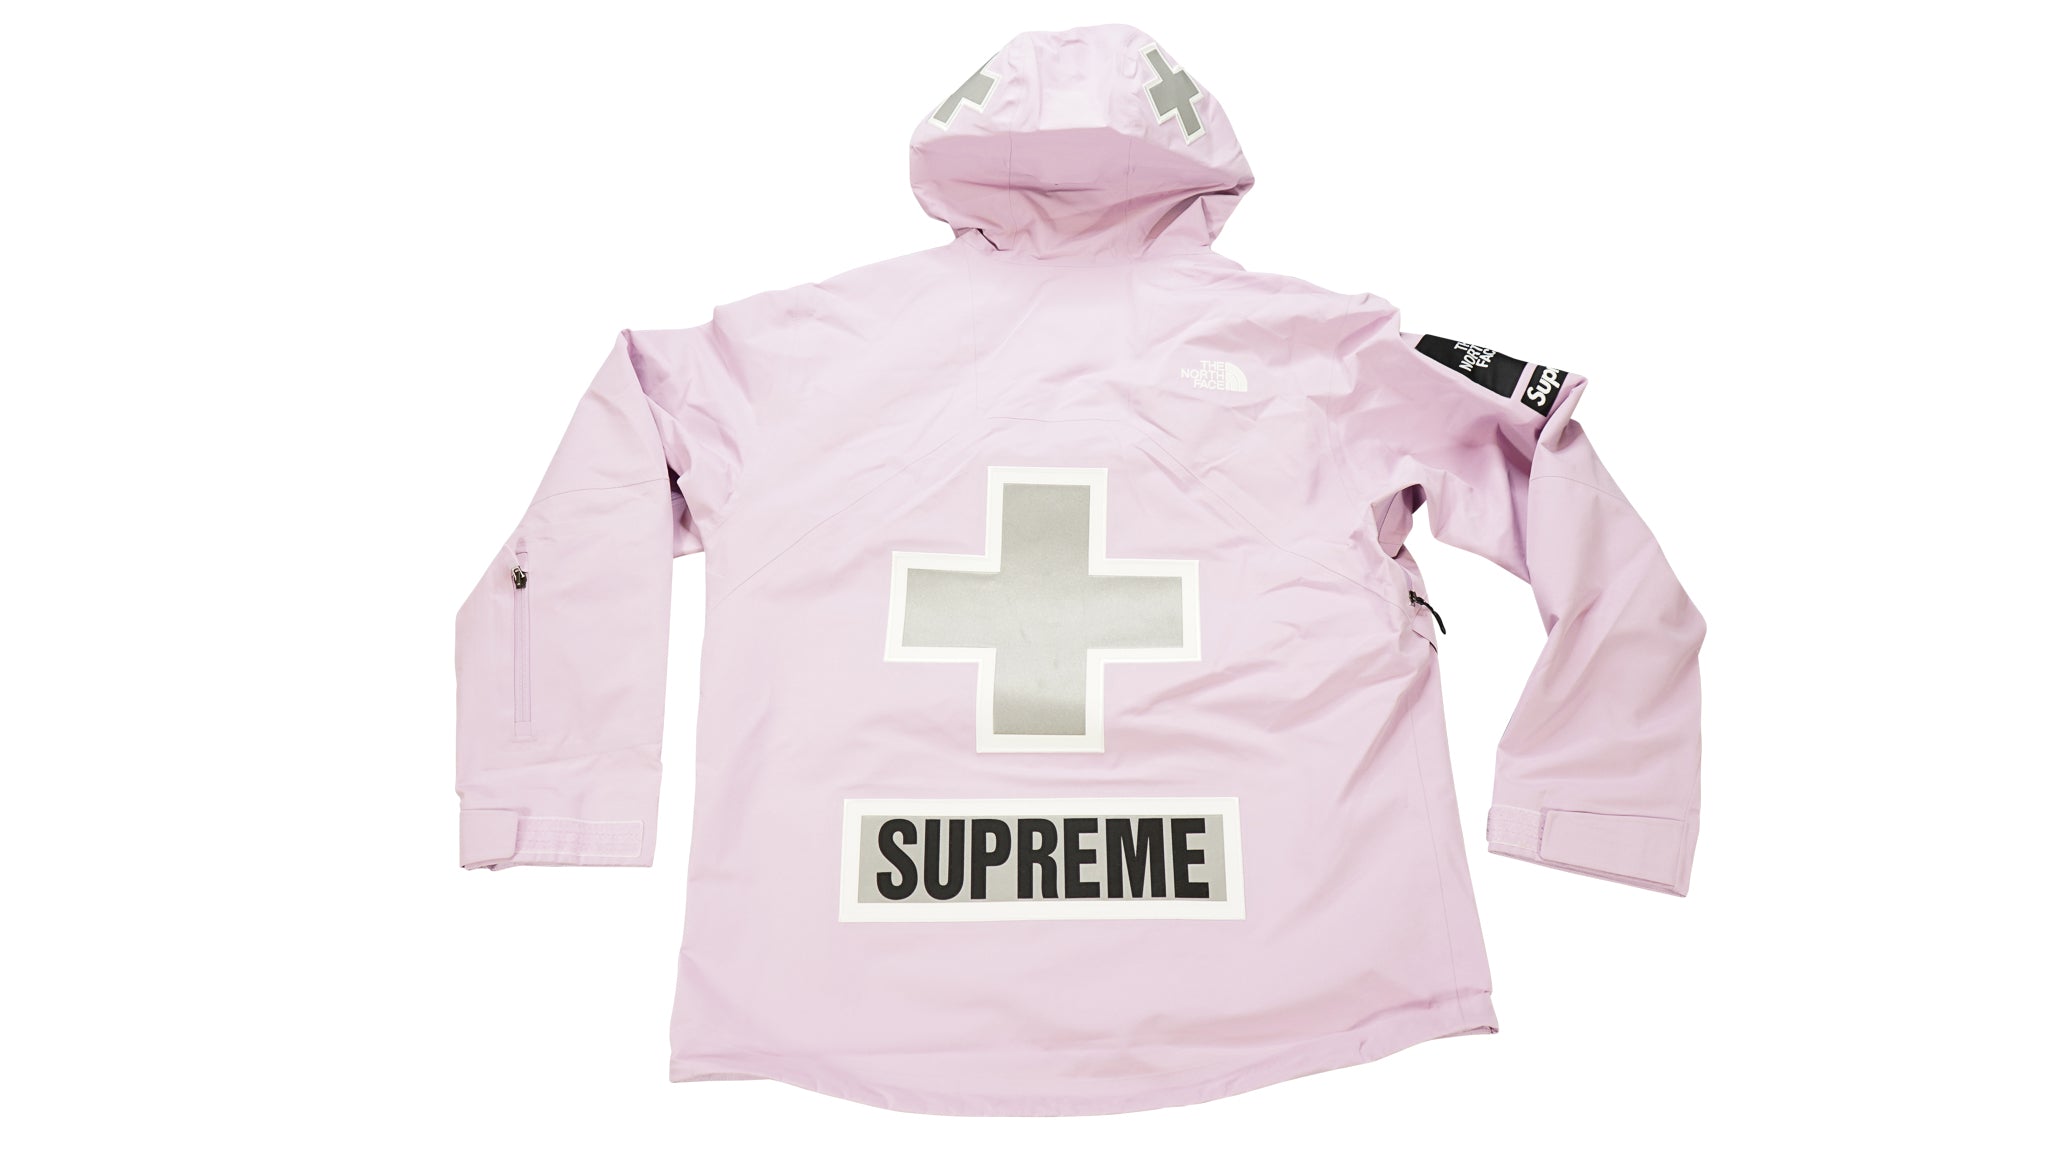 SS22 Supreme x The North Face Summit Series 